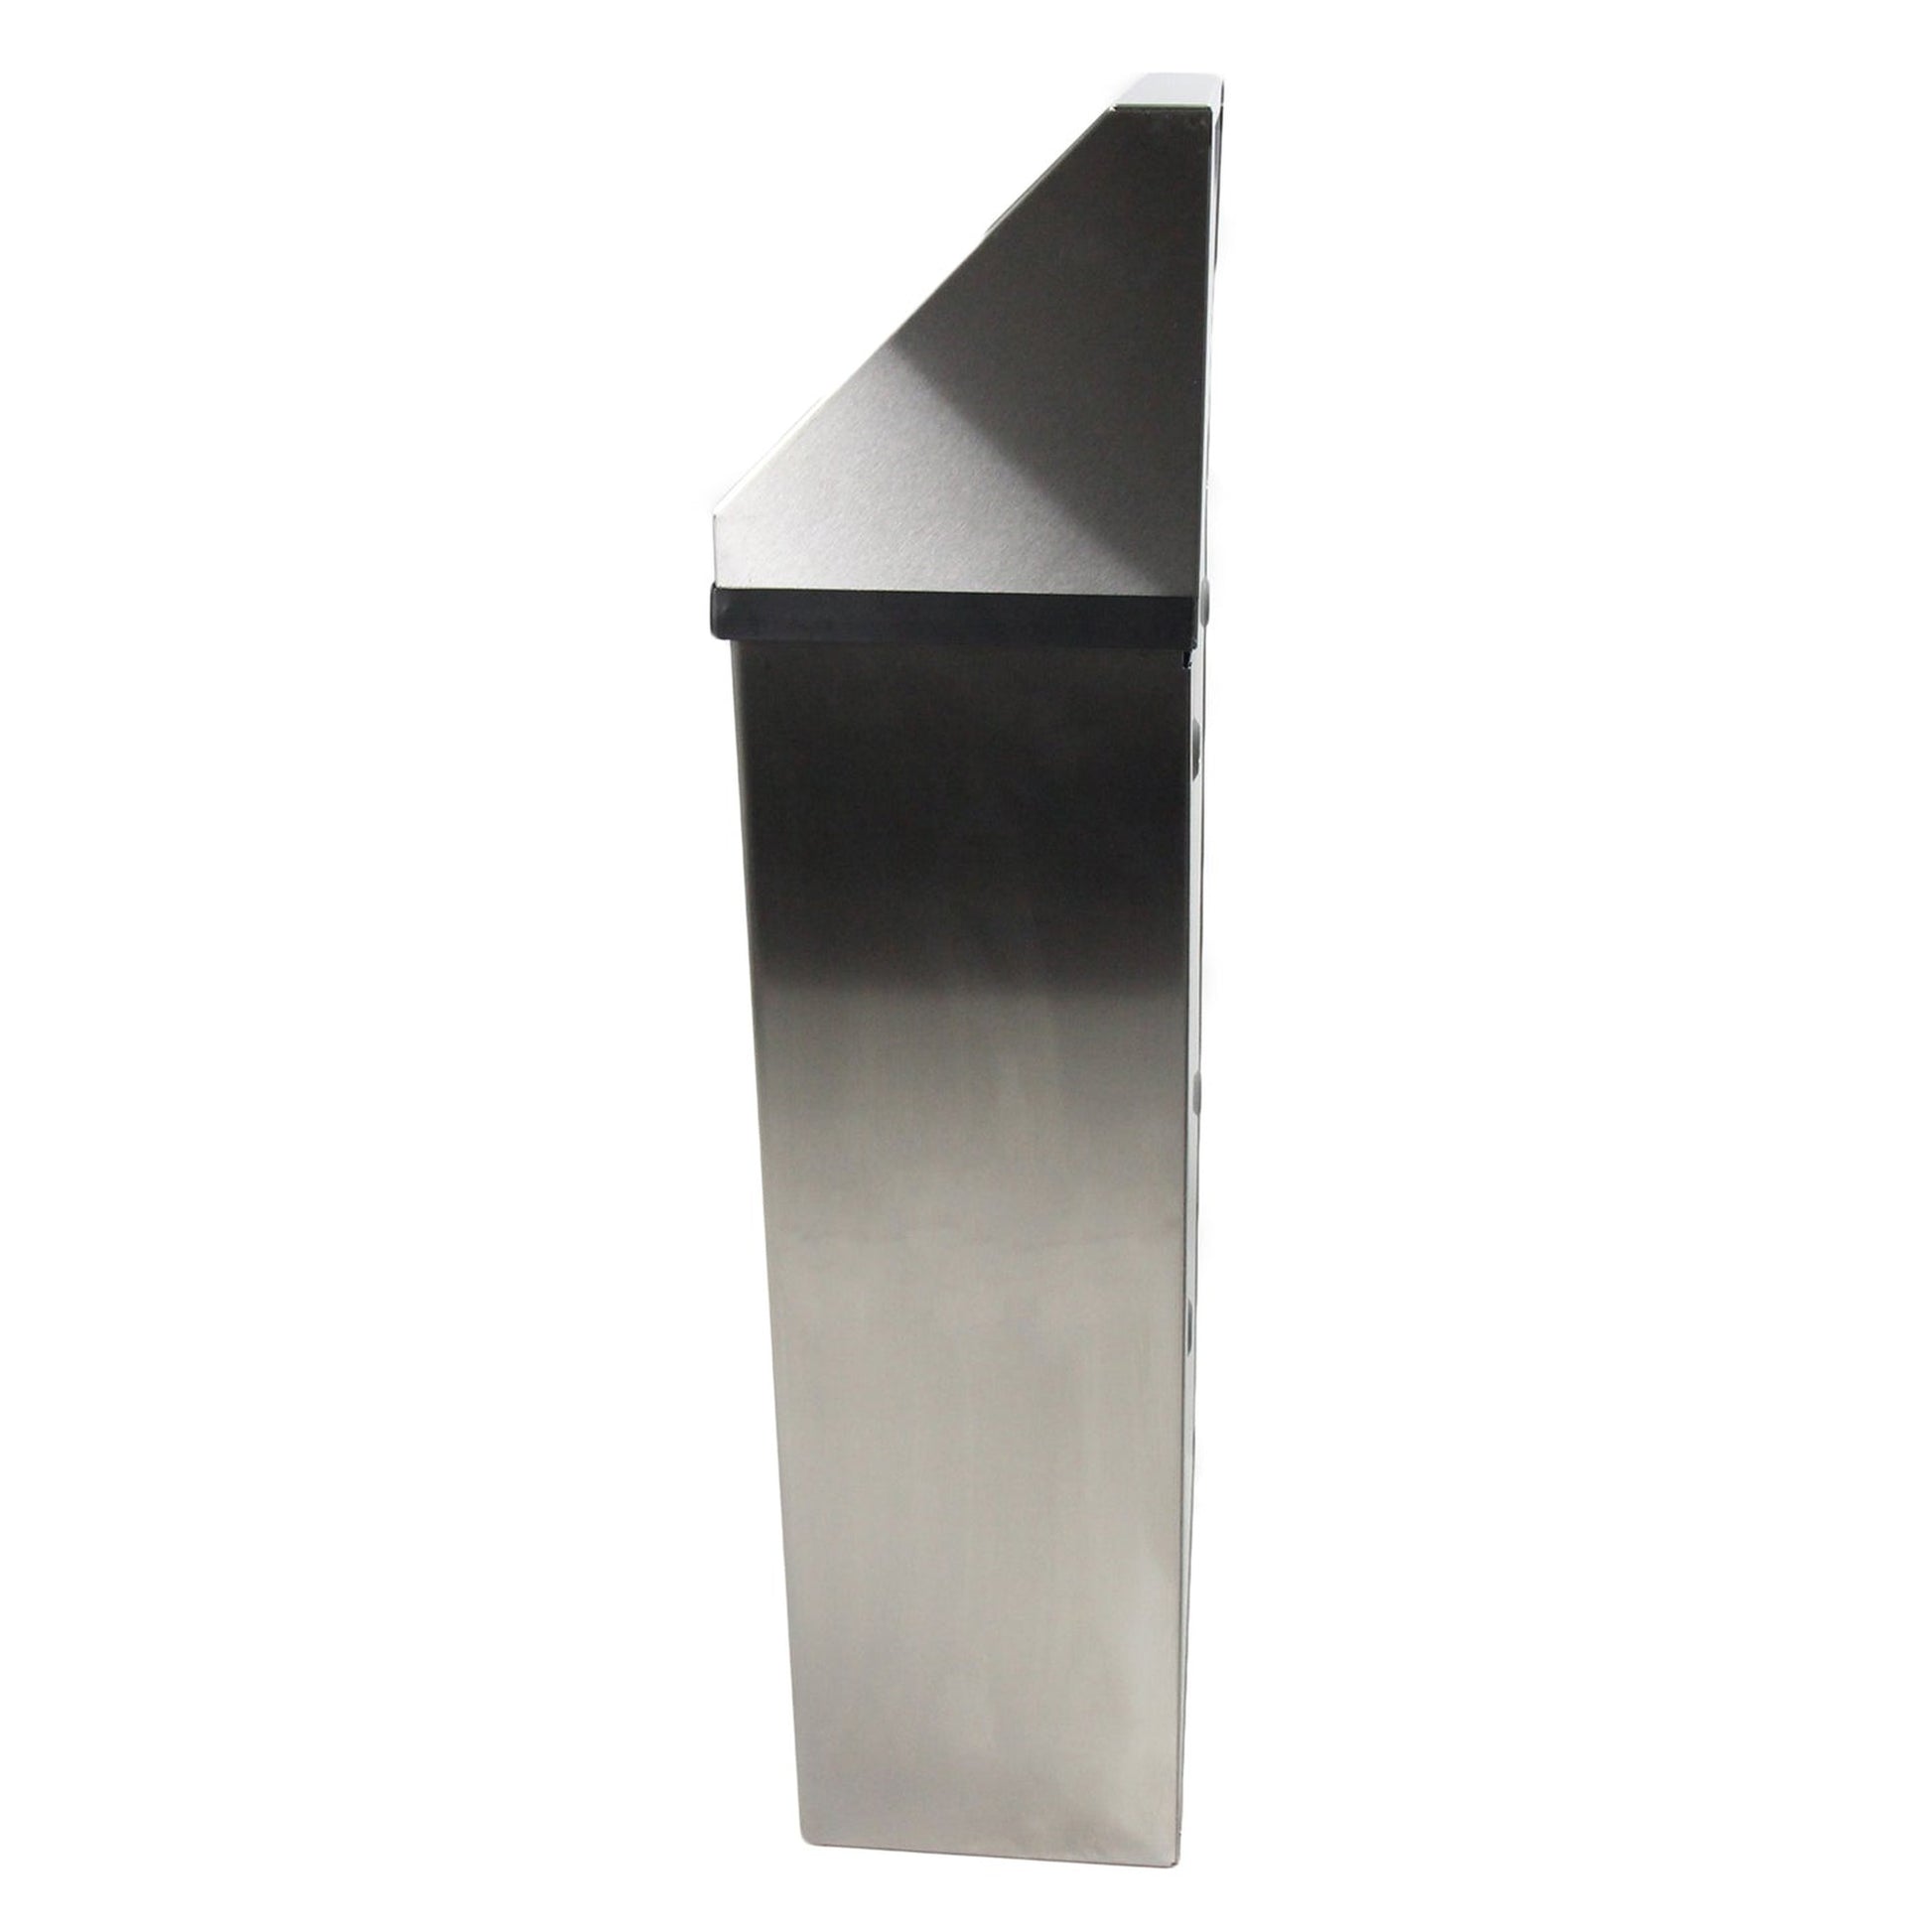 Frost 303-3-NL Wall Mounted Stainless Steel Waste Receptacle